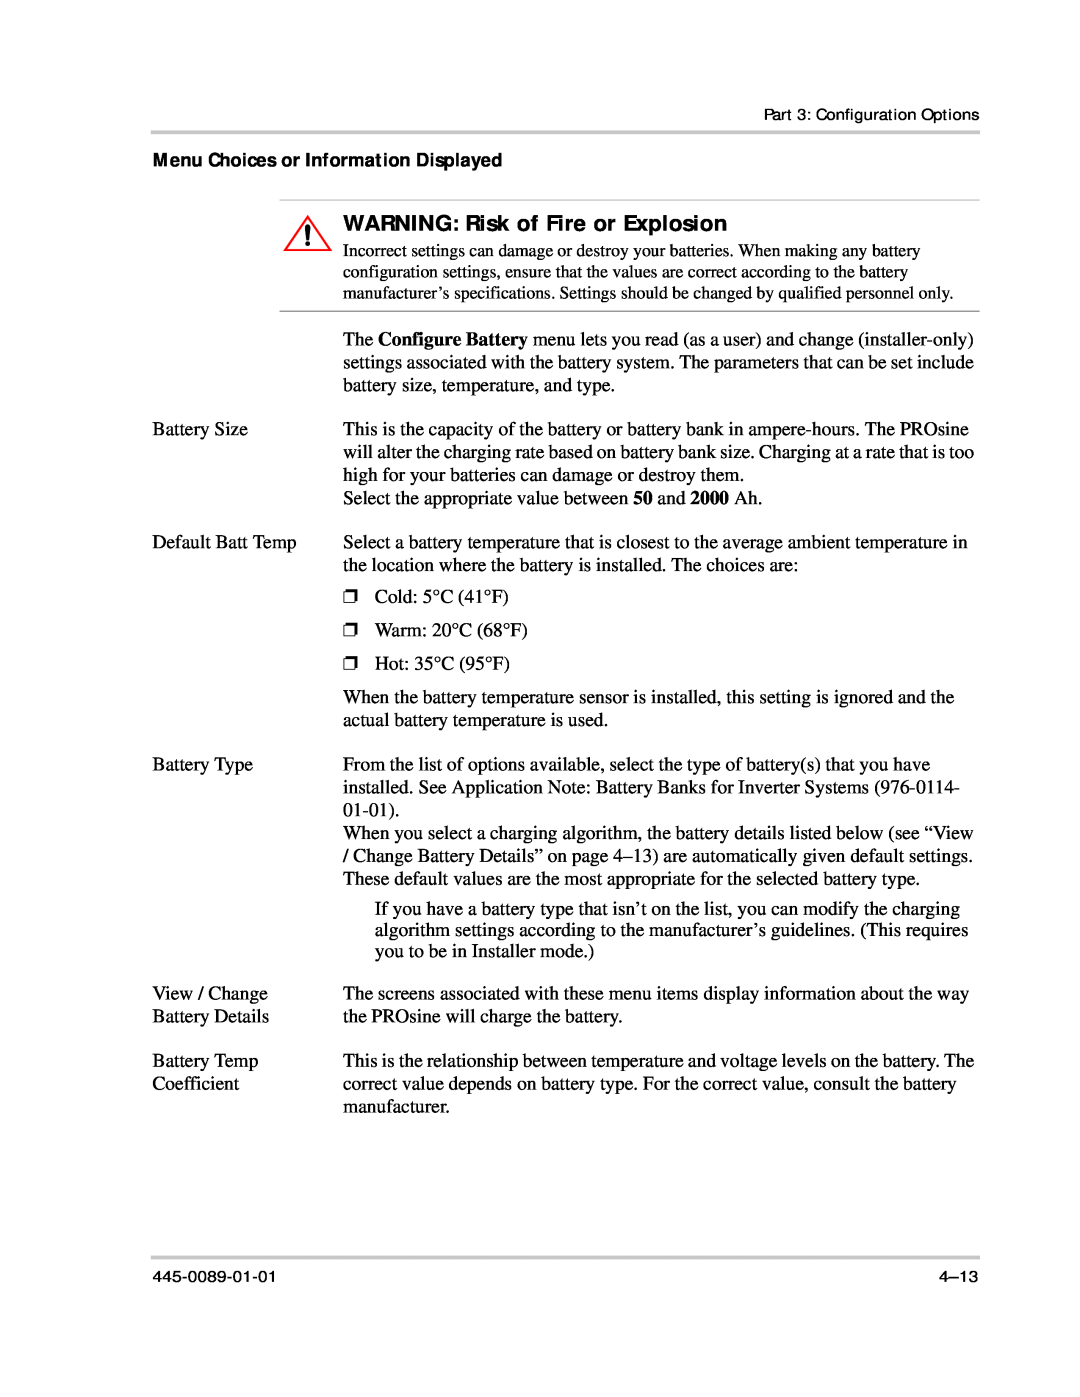 Xantrex Technology PROsine 2.0 user manual WARNING Risk of Fire or Explosion, Menu Choices or Information Displayed 